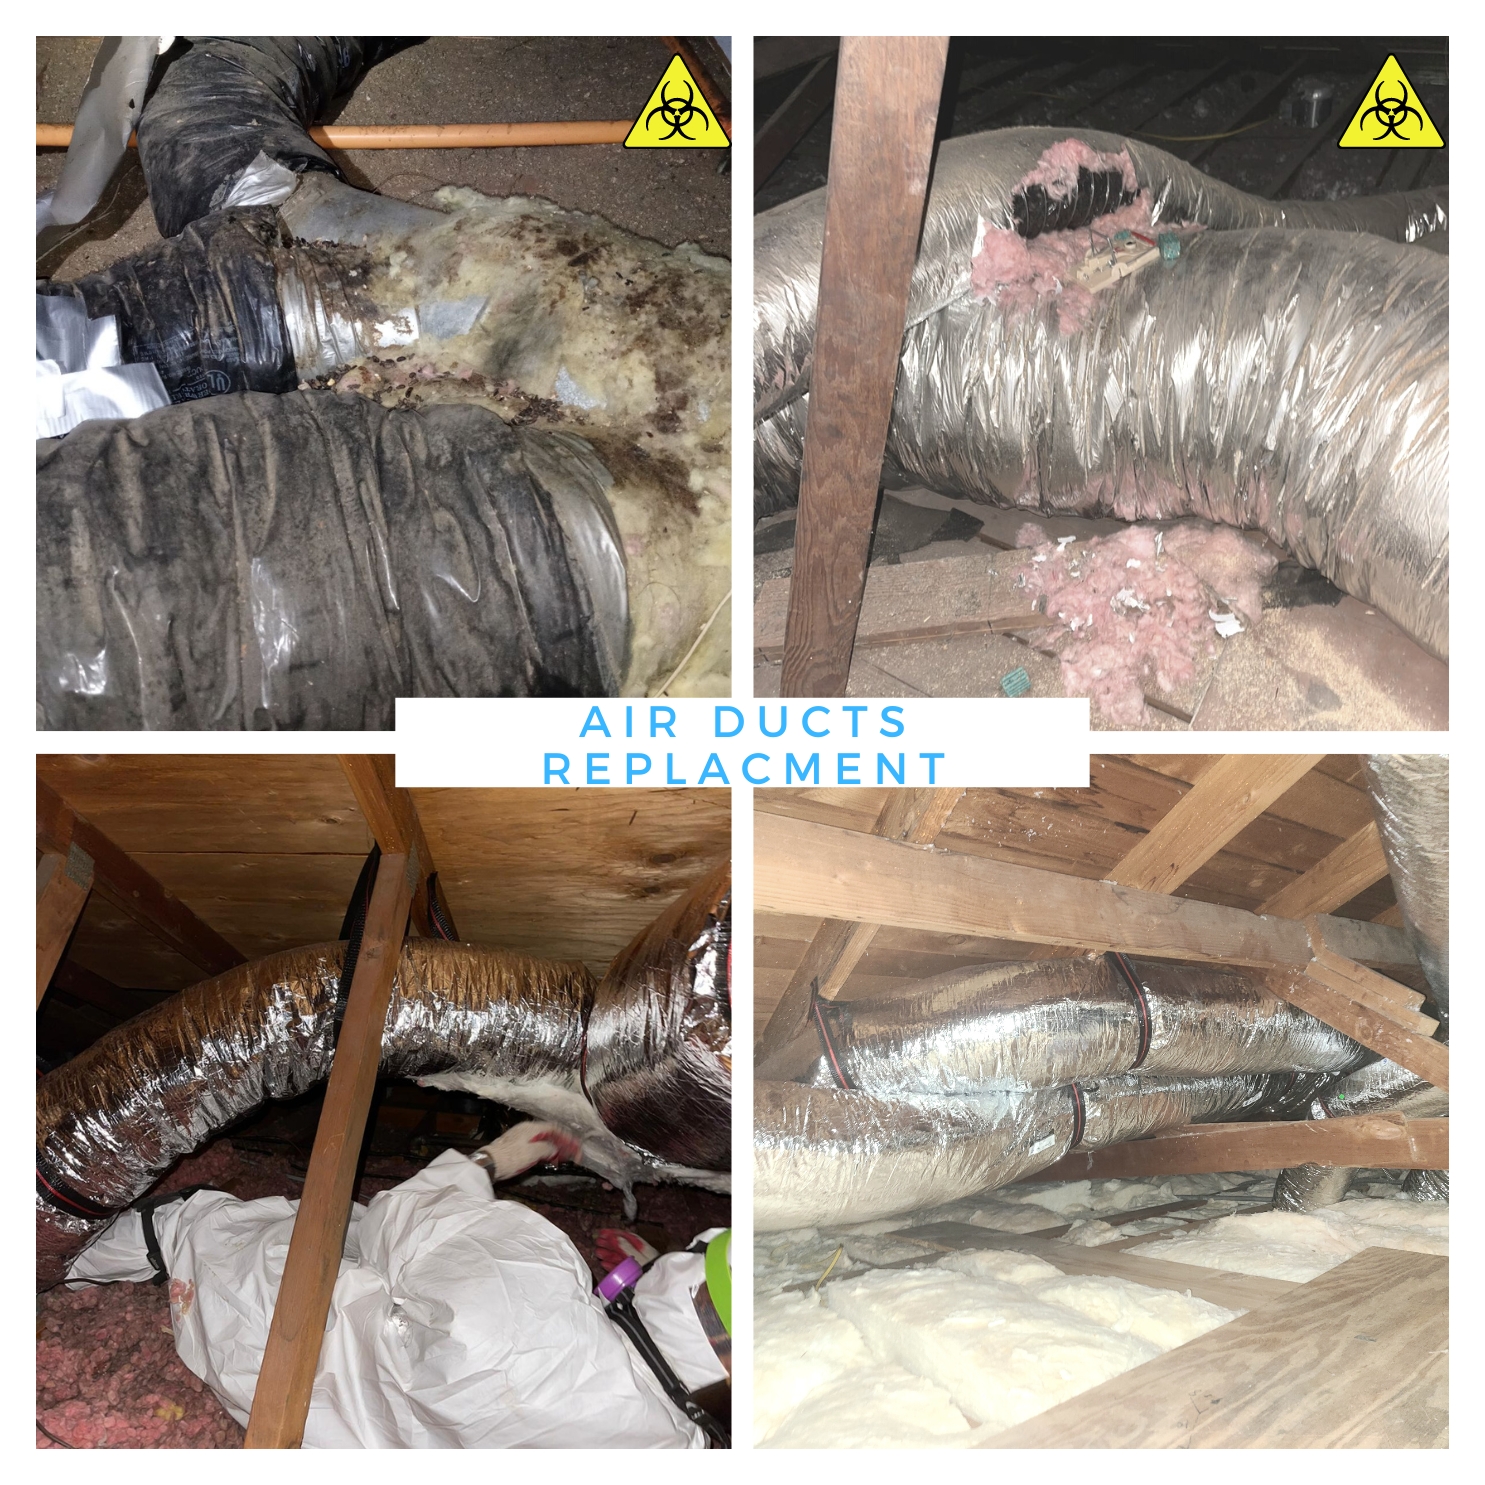 DUCT REPLACMENT